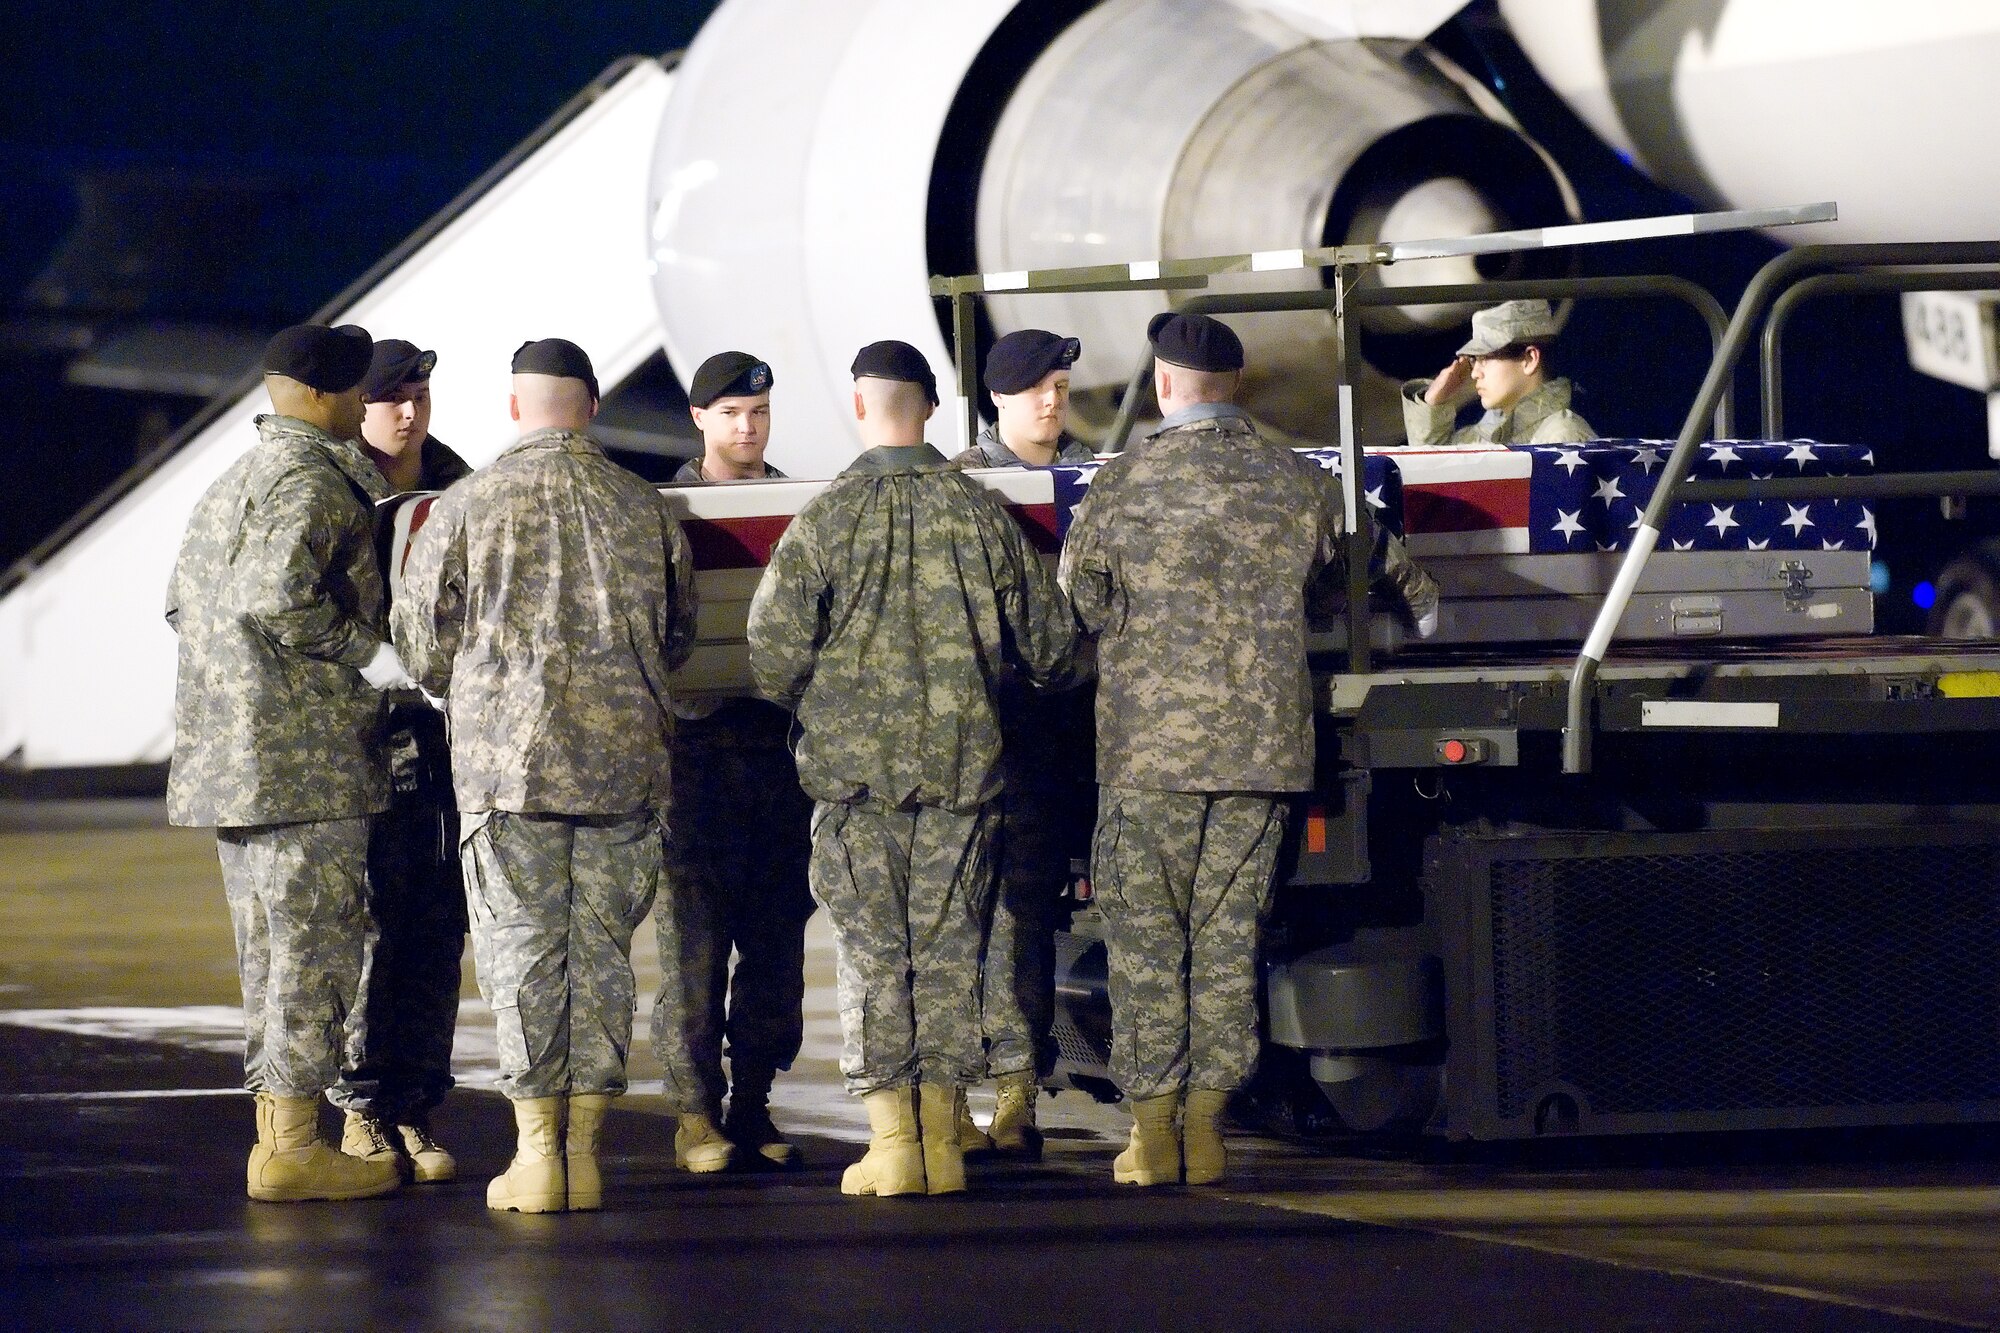 2 March 2010  USAF Photo by Jason Minto.  A U.S. Army carry team transfers the remains of Army Staff Sgt. William S. Ricketts of Corinth, MS at Dover Air Force Base, Del., Mar 2, 2010.  He was assigned to the 1st Battalion, 508th Parachute Infantry Regiment, 4th Brigade Combat Team, 82nd Airborne Division, Fort Bragg, N.C.